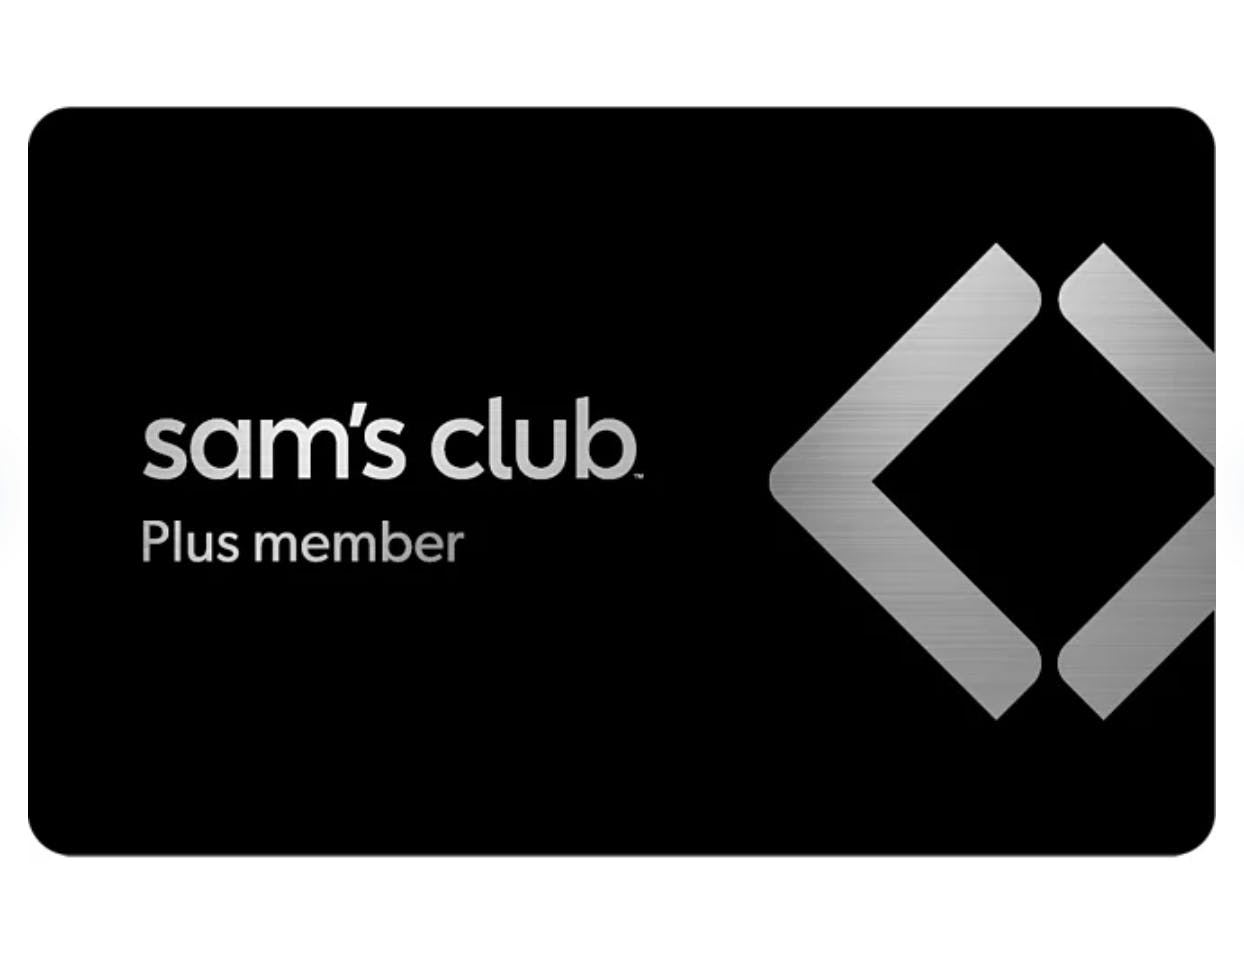 Is Sam's Club Worth the Membership Fee? (Pros & Cons) - Prudent